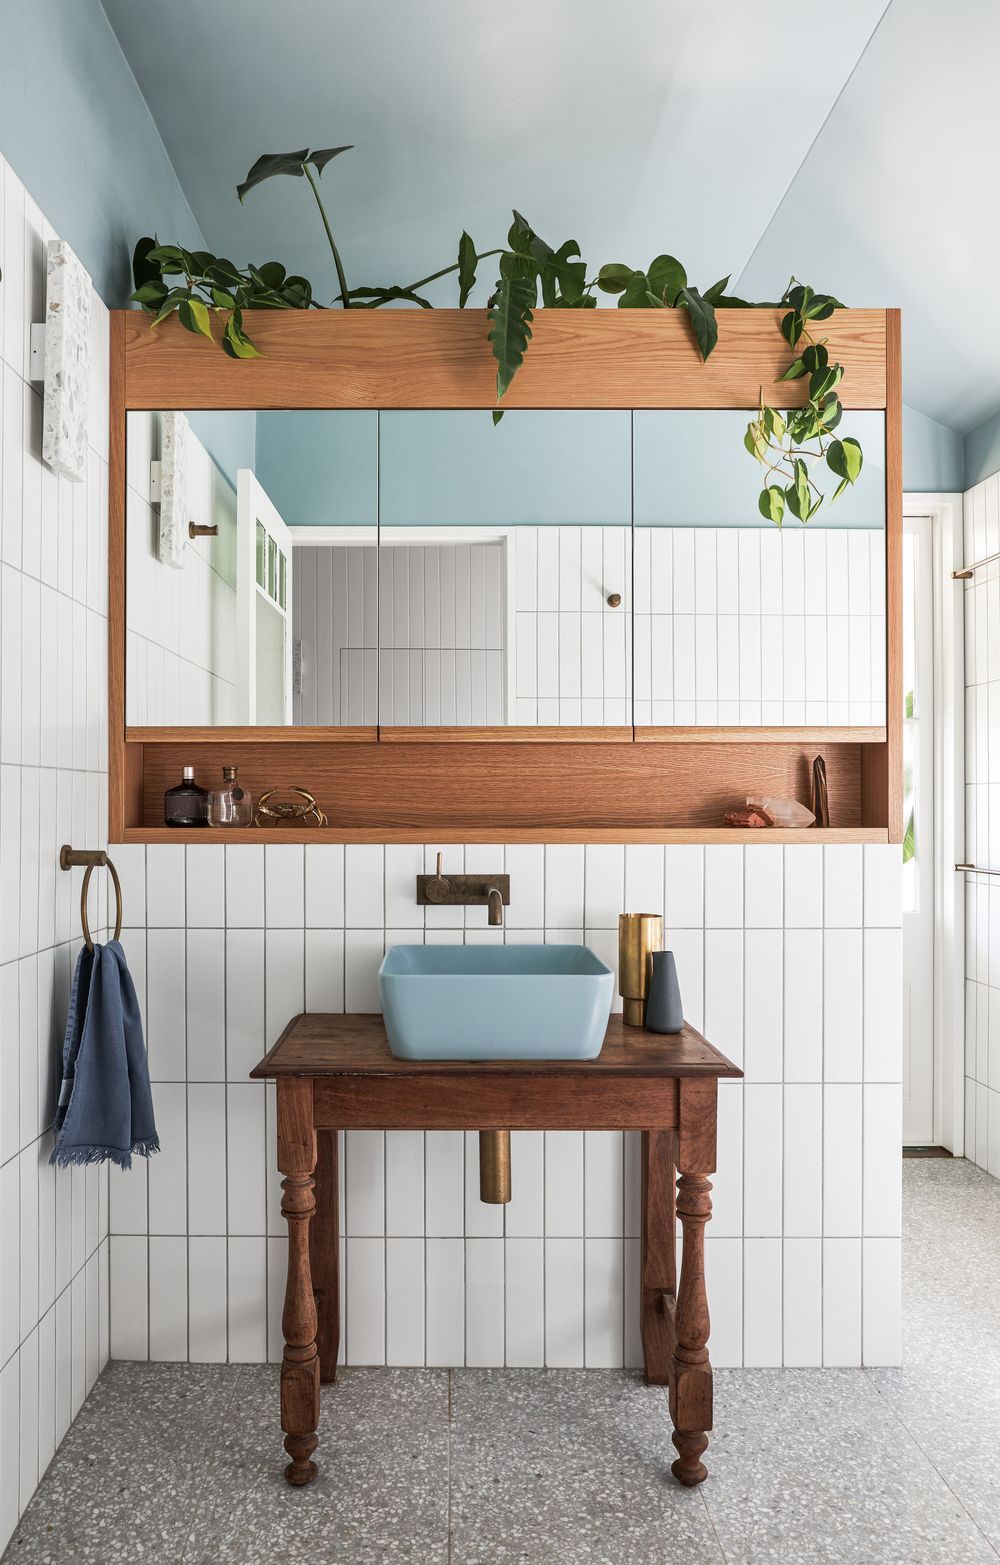 Phoenix House by Harley Graham Architects. Bathroom project featuring restored vanity and shelving. 